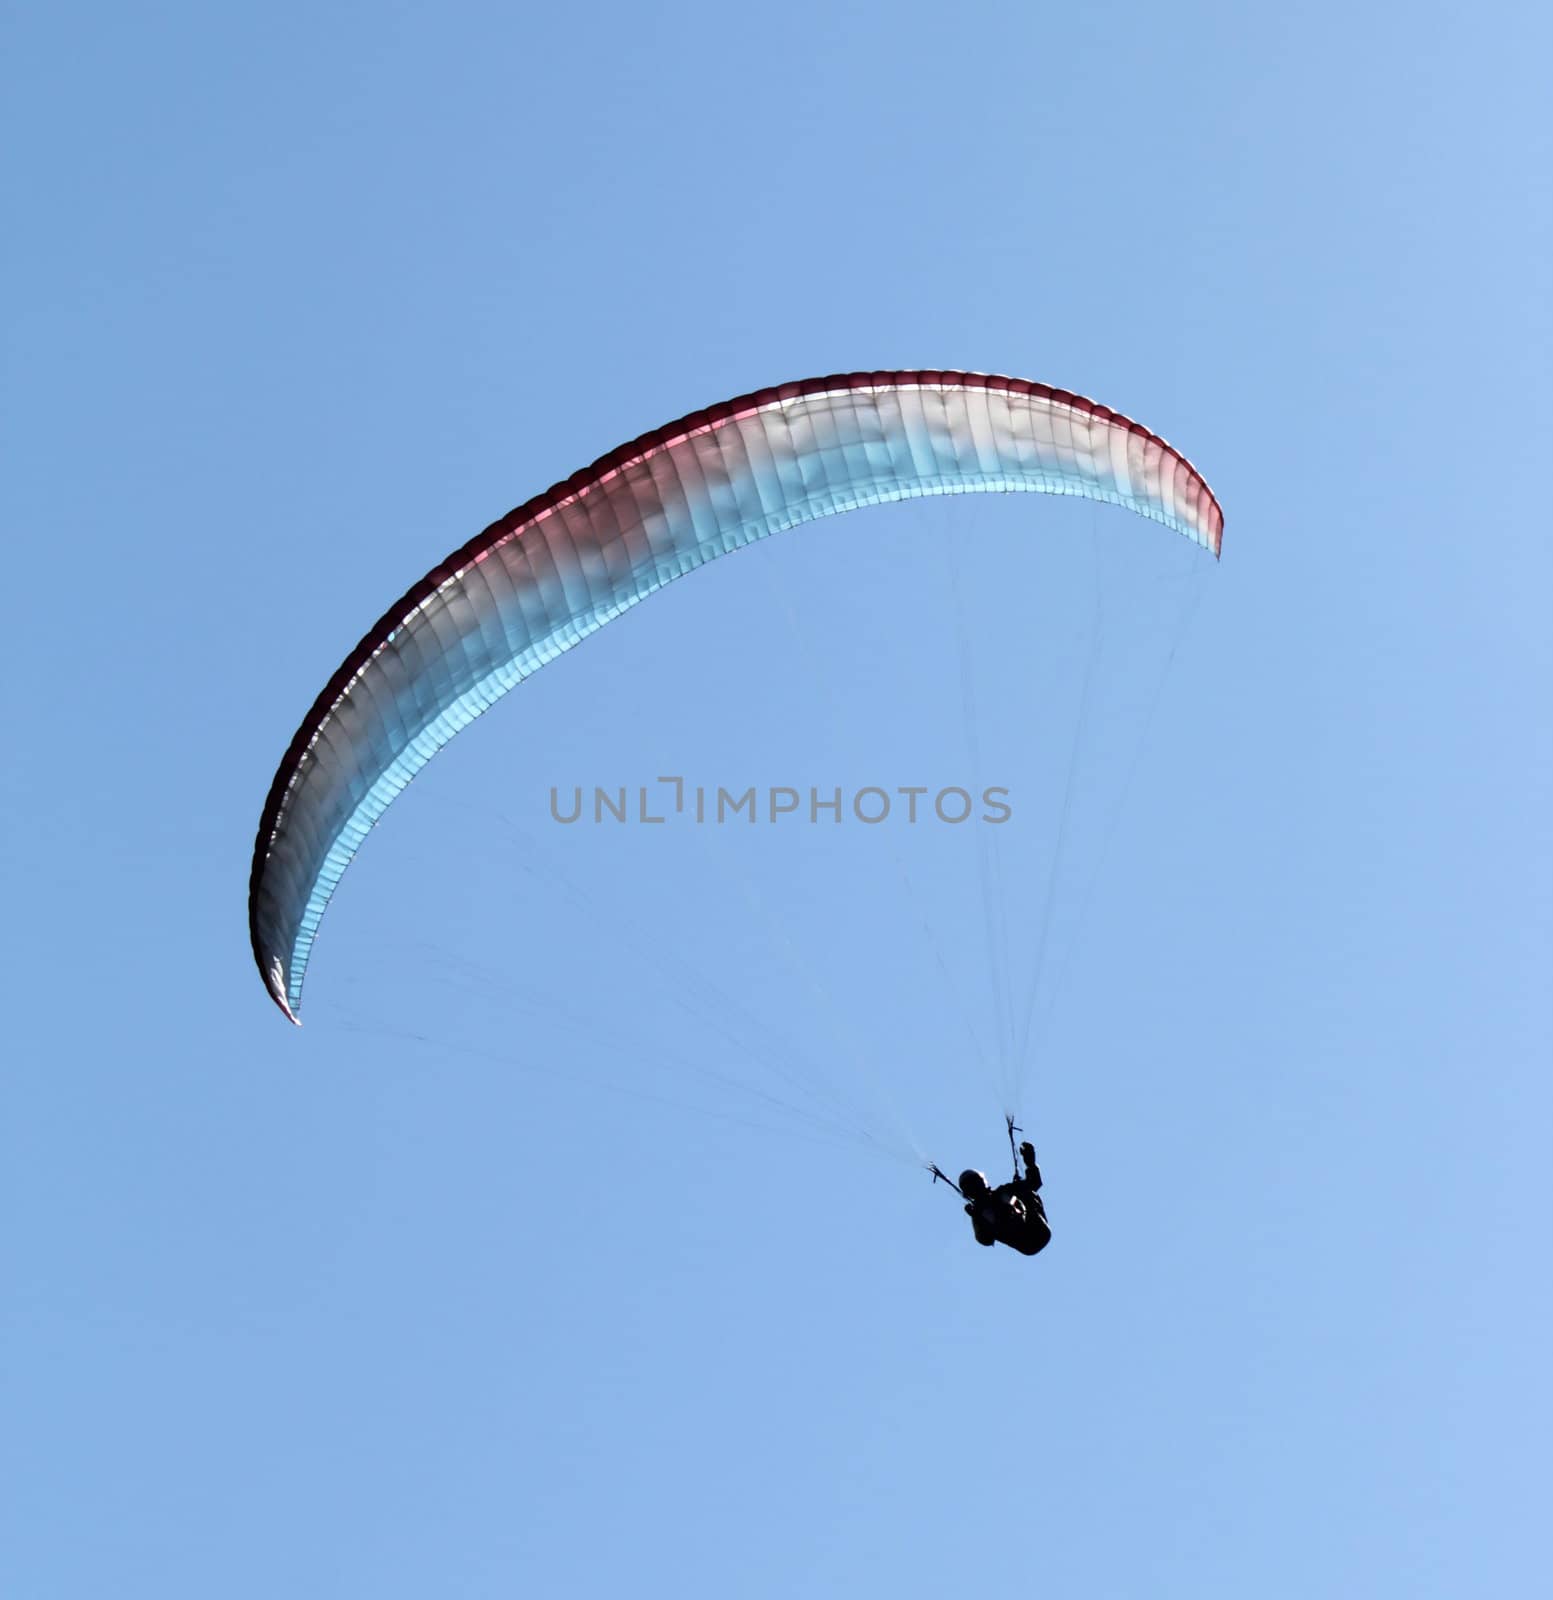 Paraglider flying with colordul paraglide in the blue sky